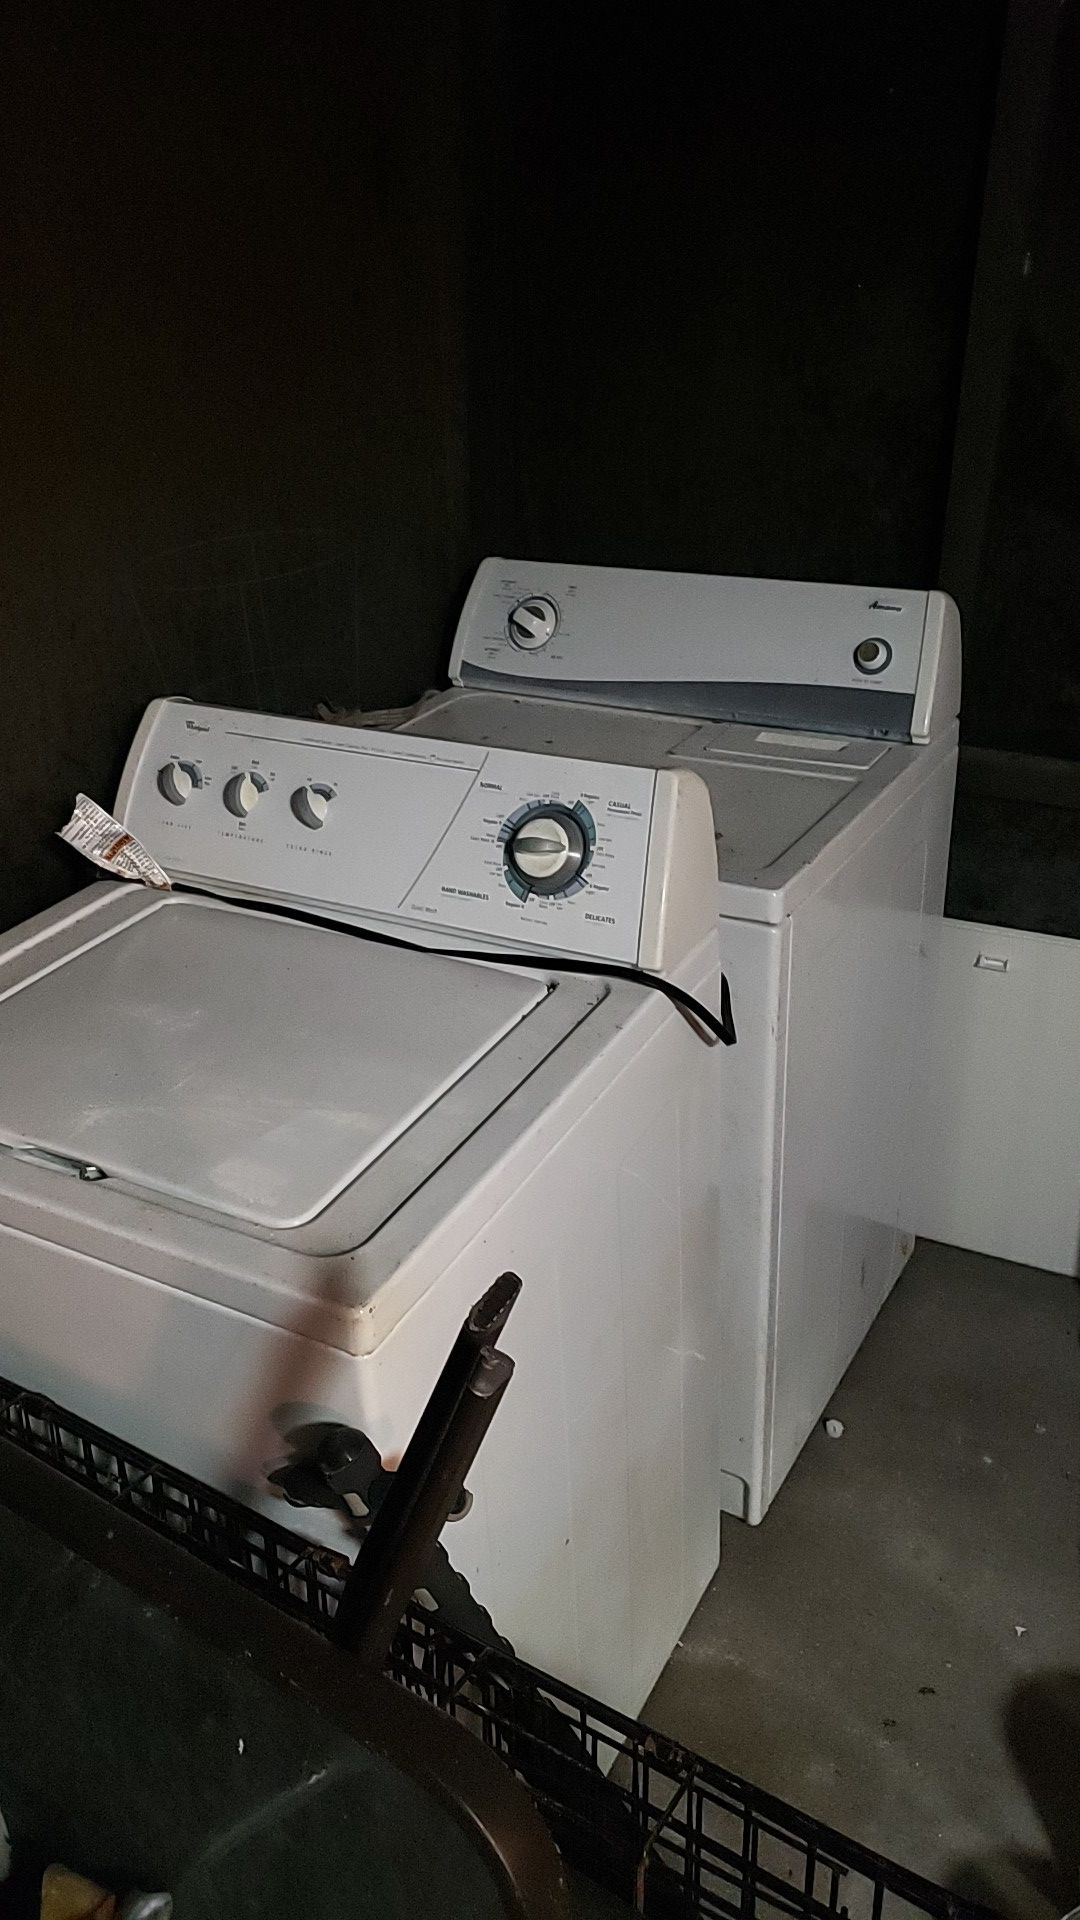 Whirlpool washer and Dryer $75